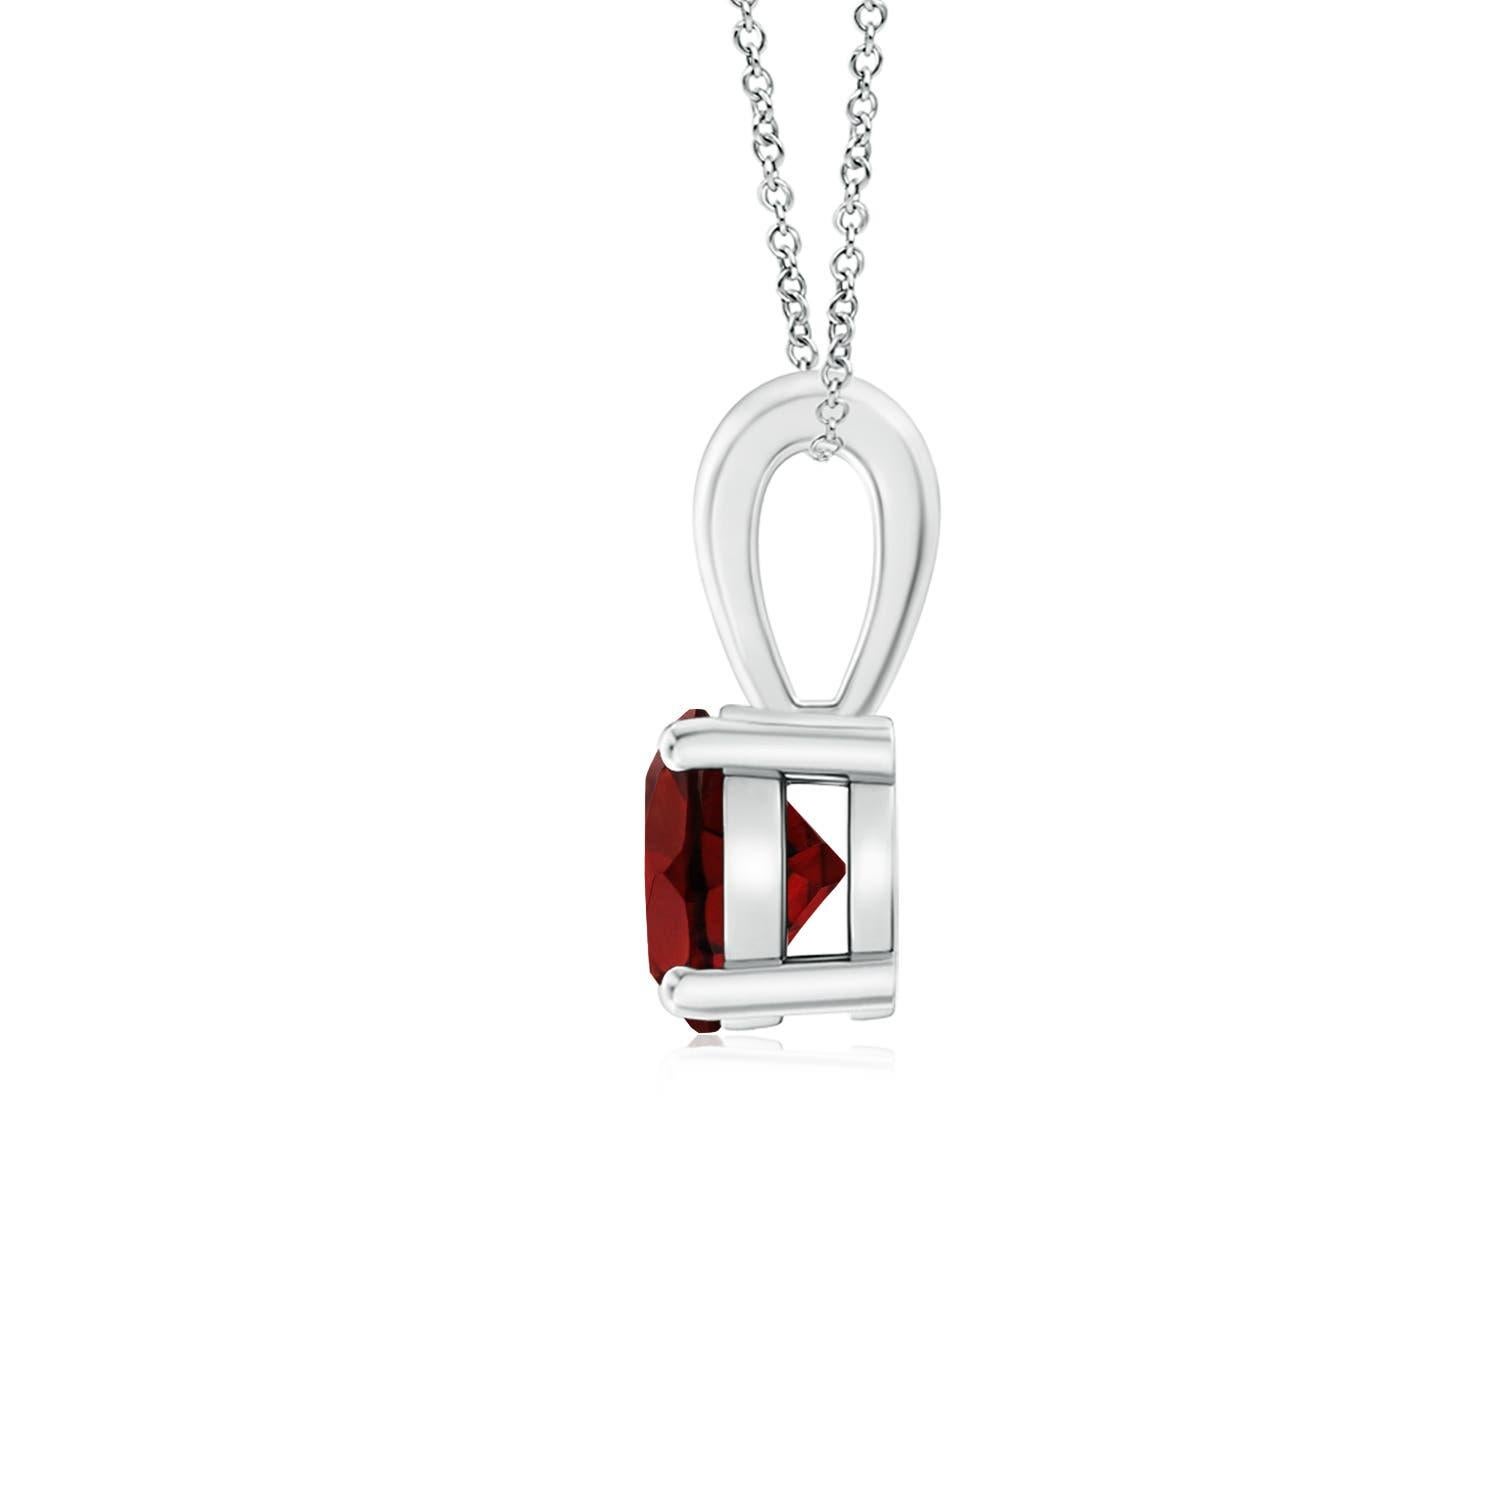 Linked to a single bale is a sparkling garnet secured in a four prong setting. This solitaire garnet pendant has a simple design and draws all the attention towards its deep red hue. It is crafted in platinum.
Garnet is the Birthstone for January